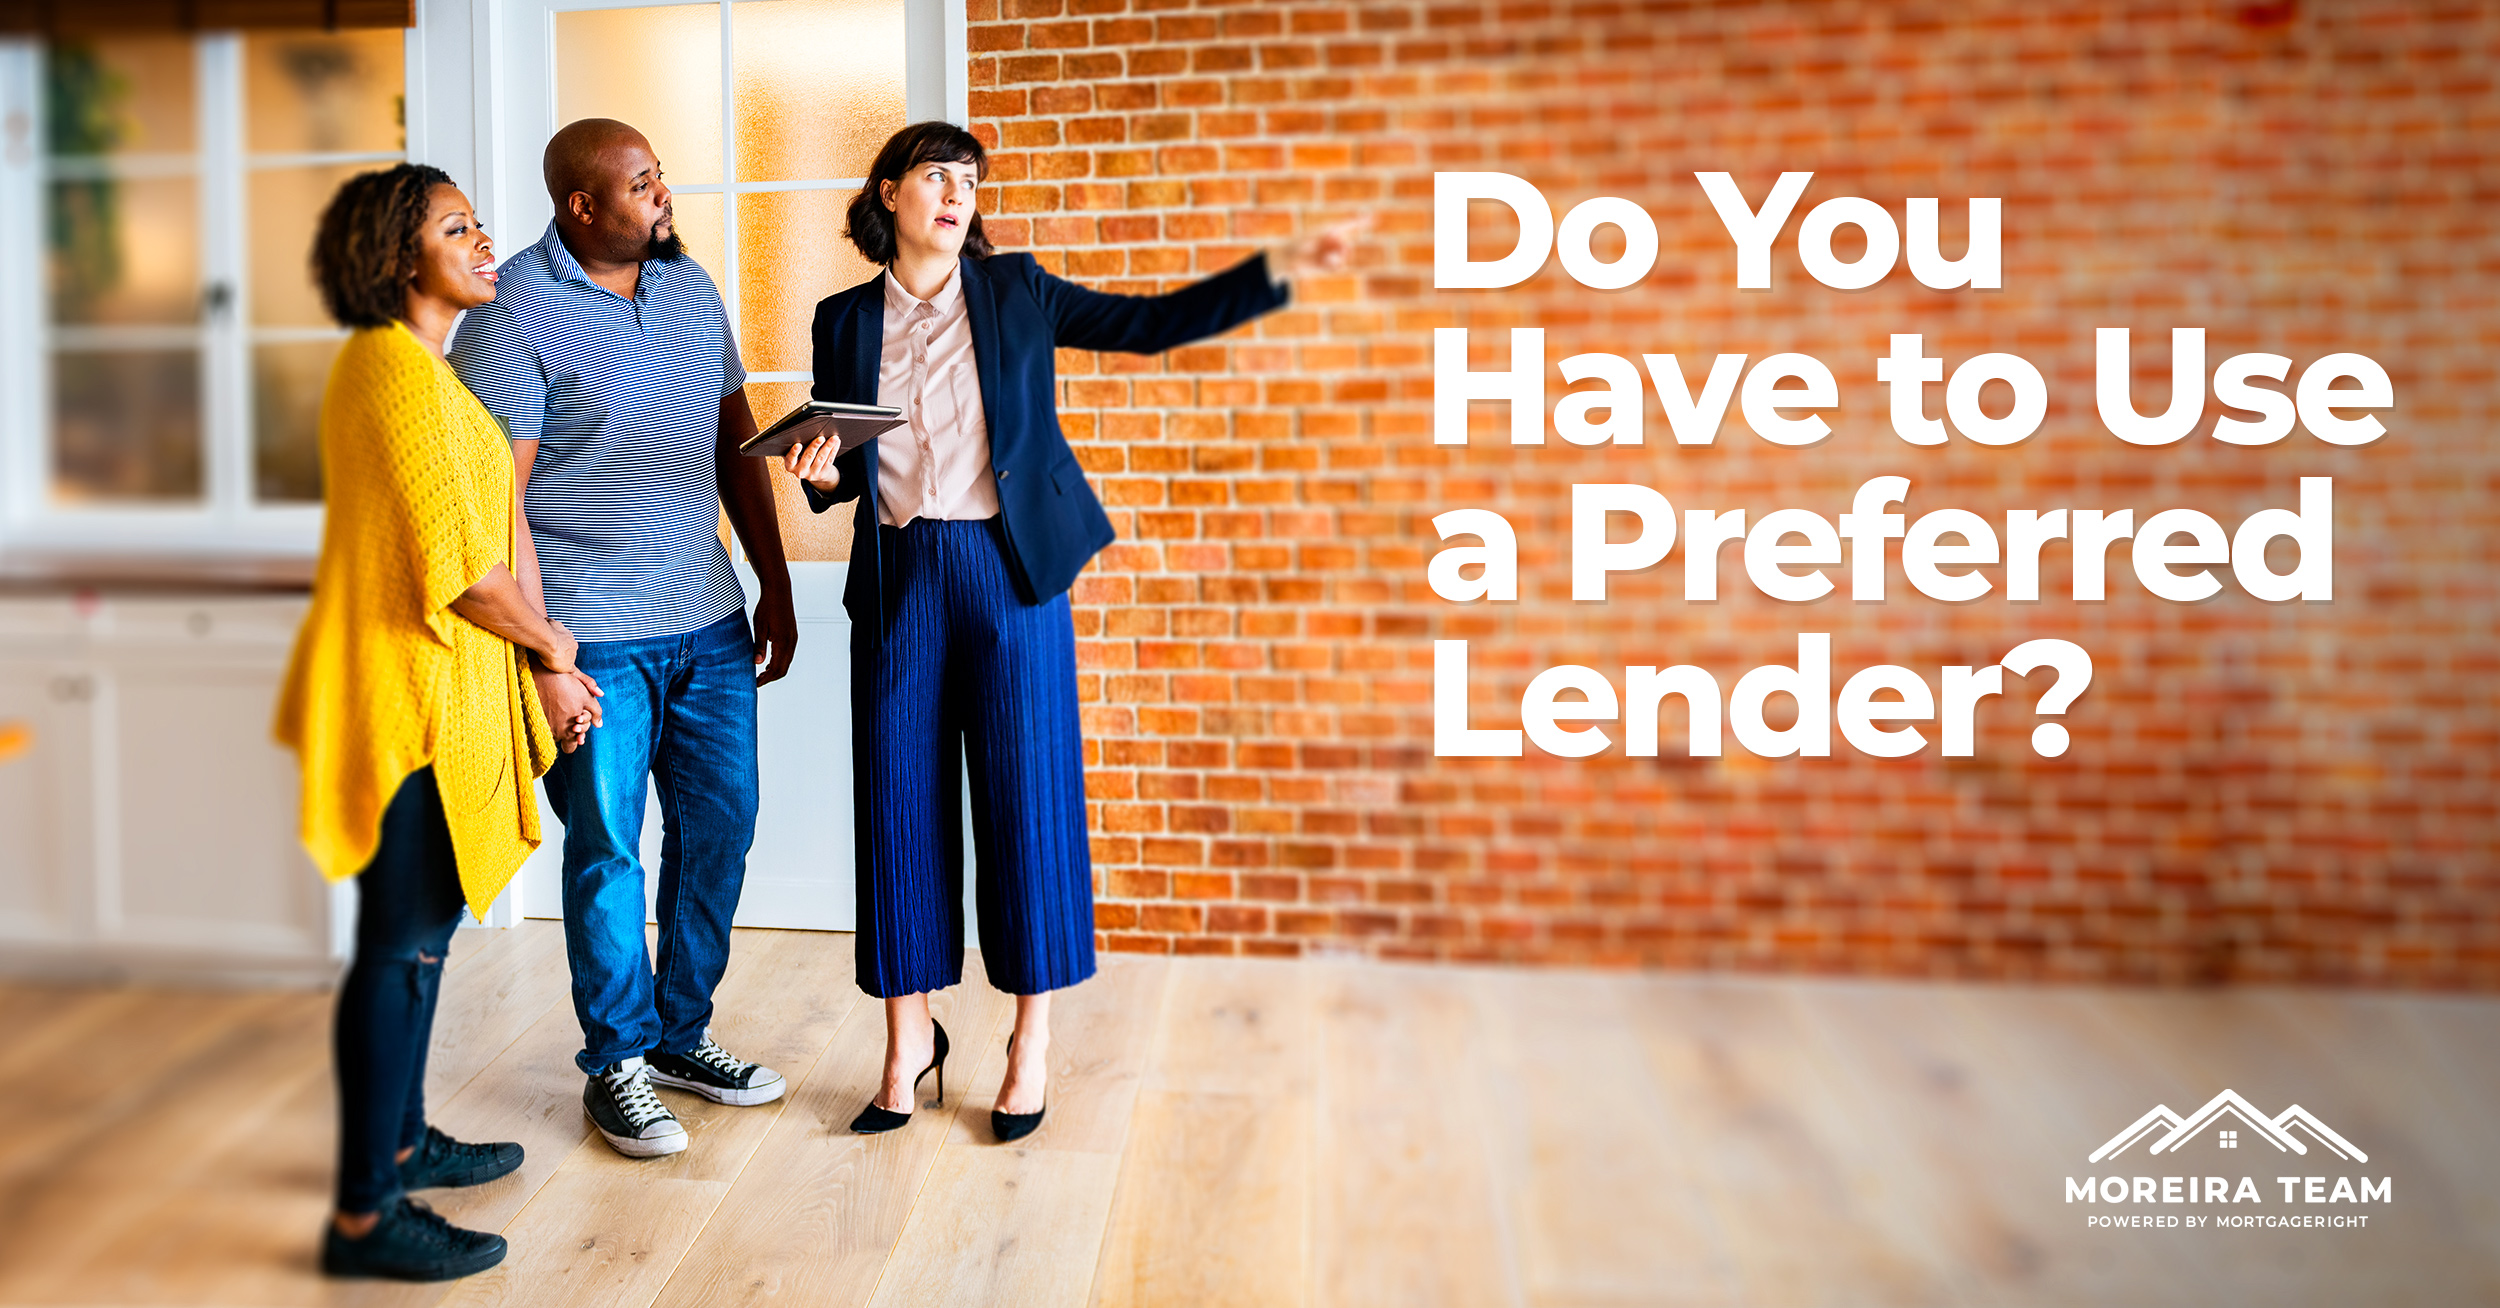 Do you have to use a preferred lender?